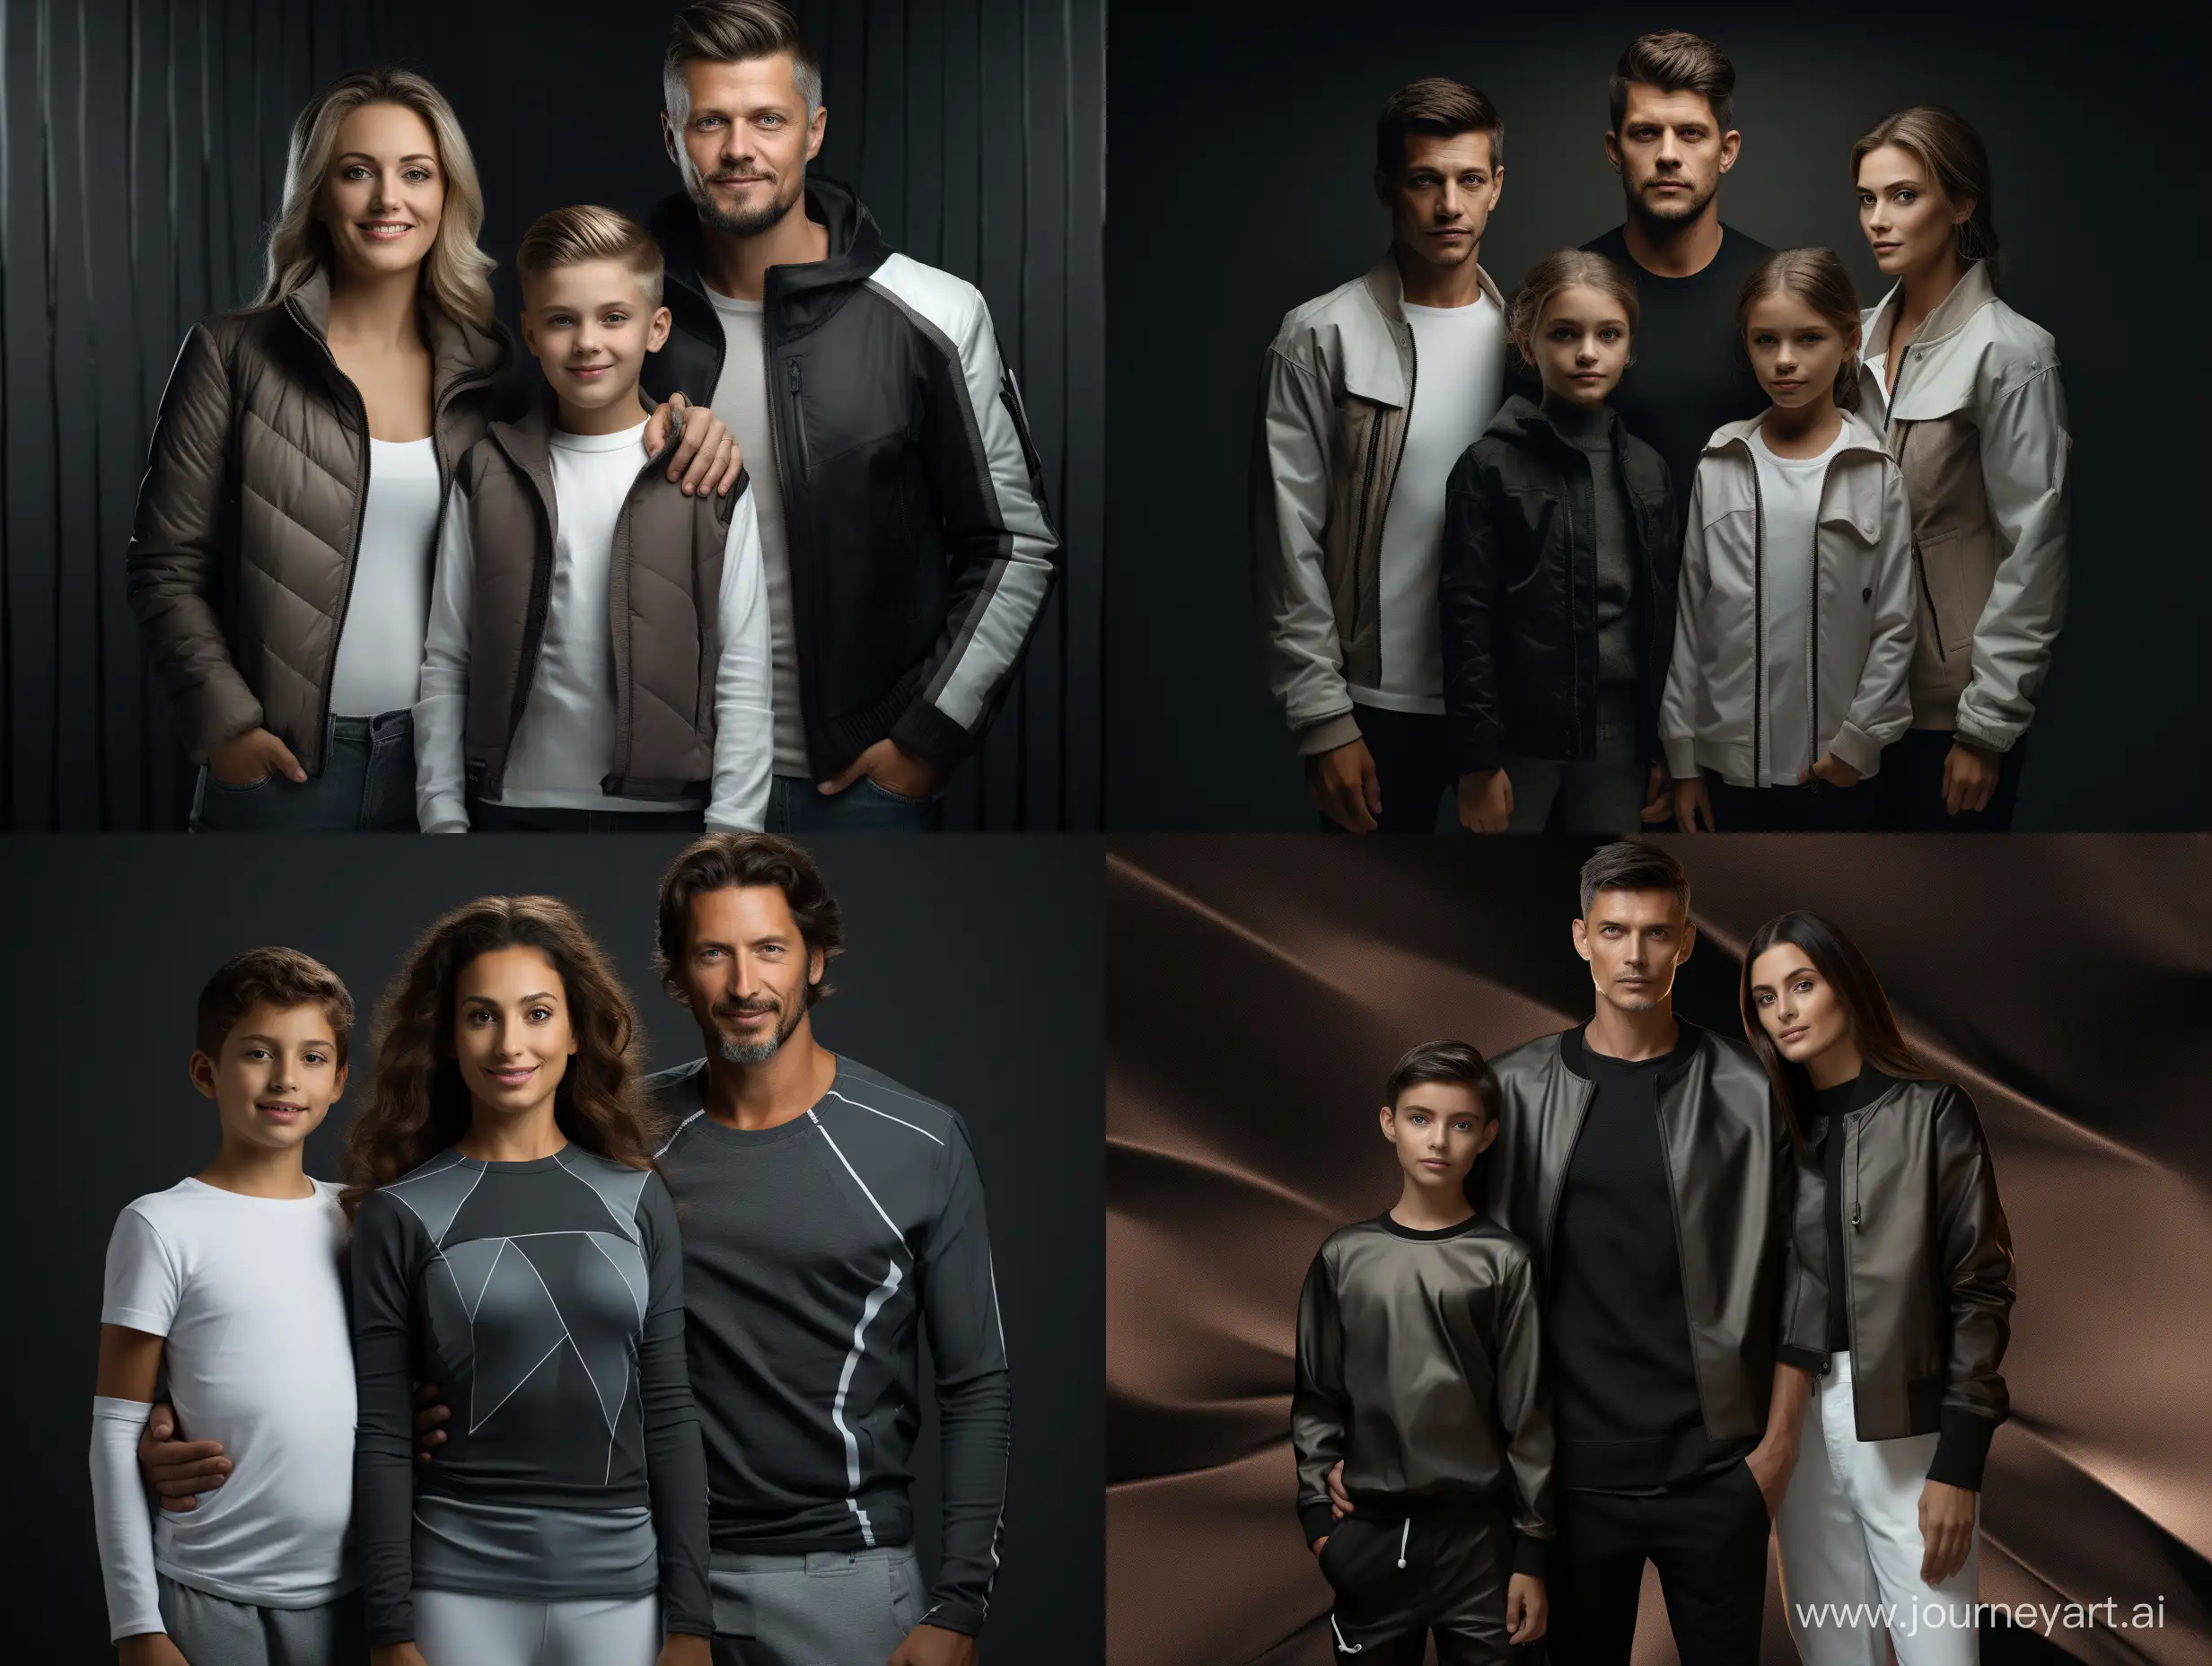 a a family with a father a mother a boy and a girl standing next to each other, affinity photo, luminar ai, trending on pexels, grid of styles, dark and white mode, images on the sales website, clothing concept, dark-toned product photos, realistically rendered clothing, curated collections, photoshop collage, trending on r/techwearclothing, pinterest render, fashion model features, stacked image, human skin texture, rought, suits with zips between the limbs and overalls made of recycled plastic